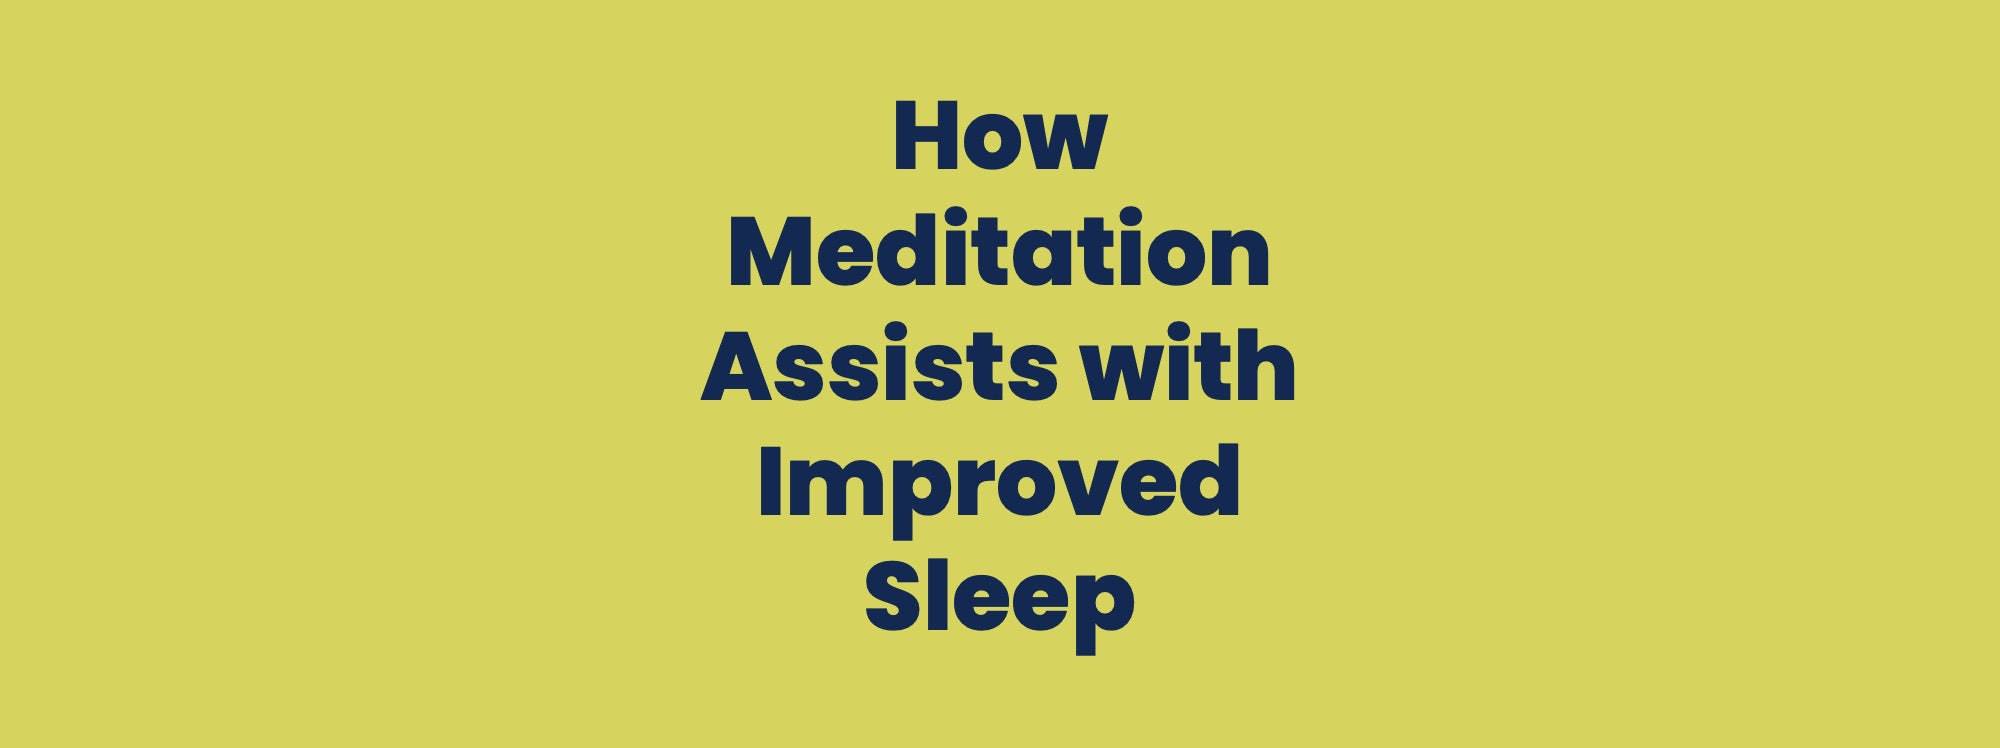 How Meditation Assists with Improved Sleep